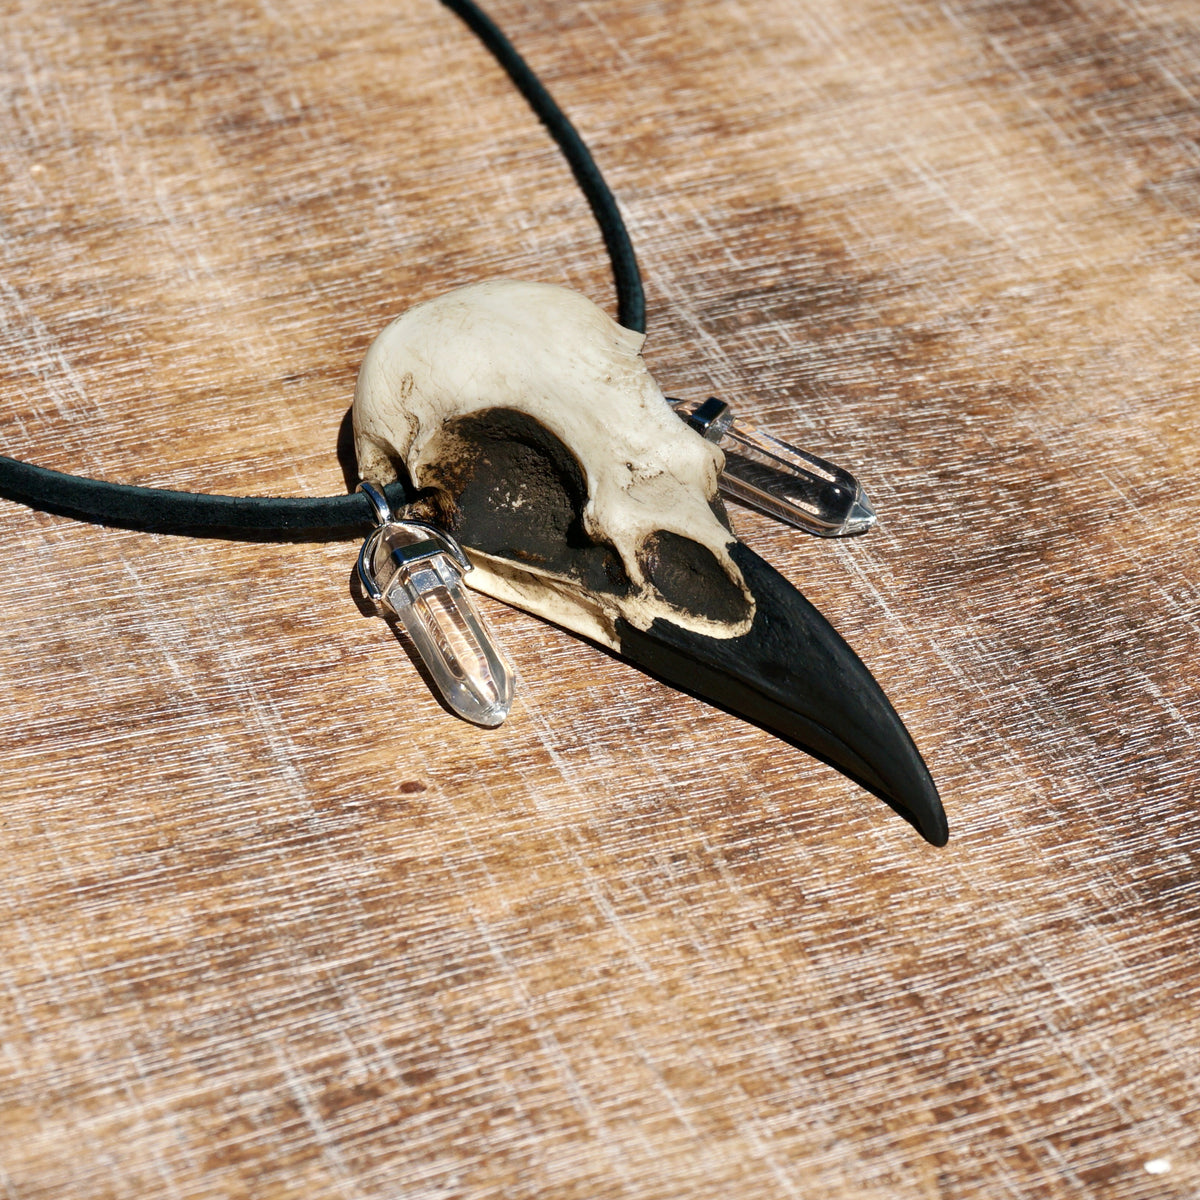 Healing quartz crystal bird skull necklace raven pendant on suede leather cord and two crystal points on each side of the skull.